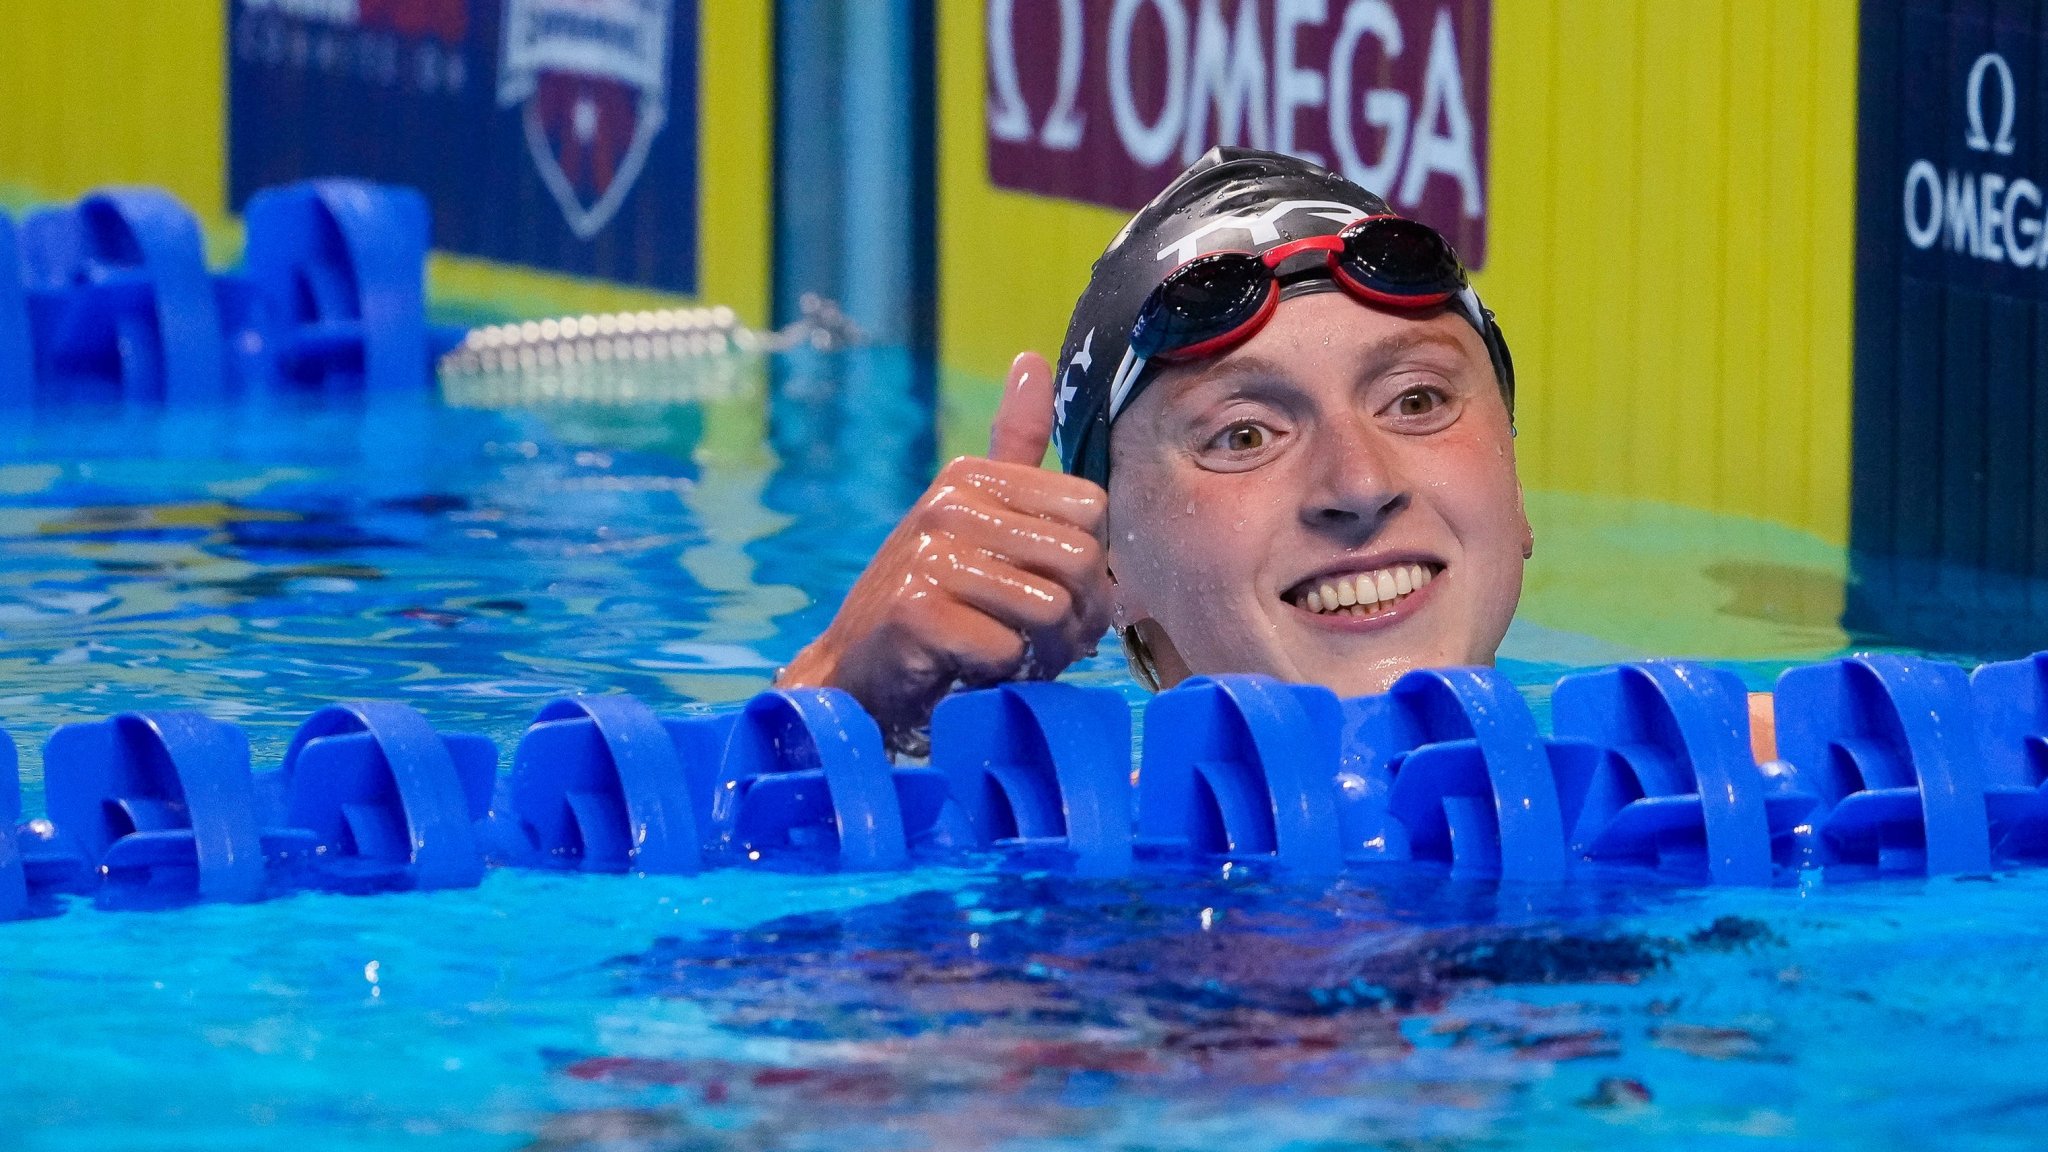 Opinion: Katie Ledecky makes history at Olympic trials; Caeleb Dressel just getting started